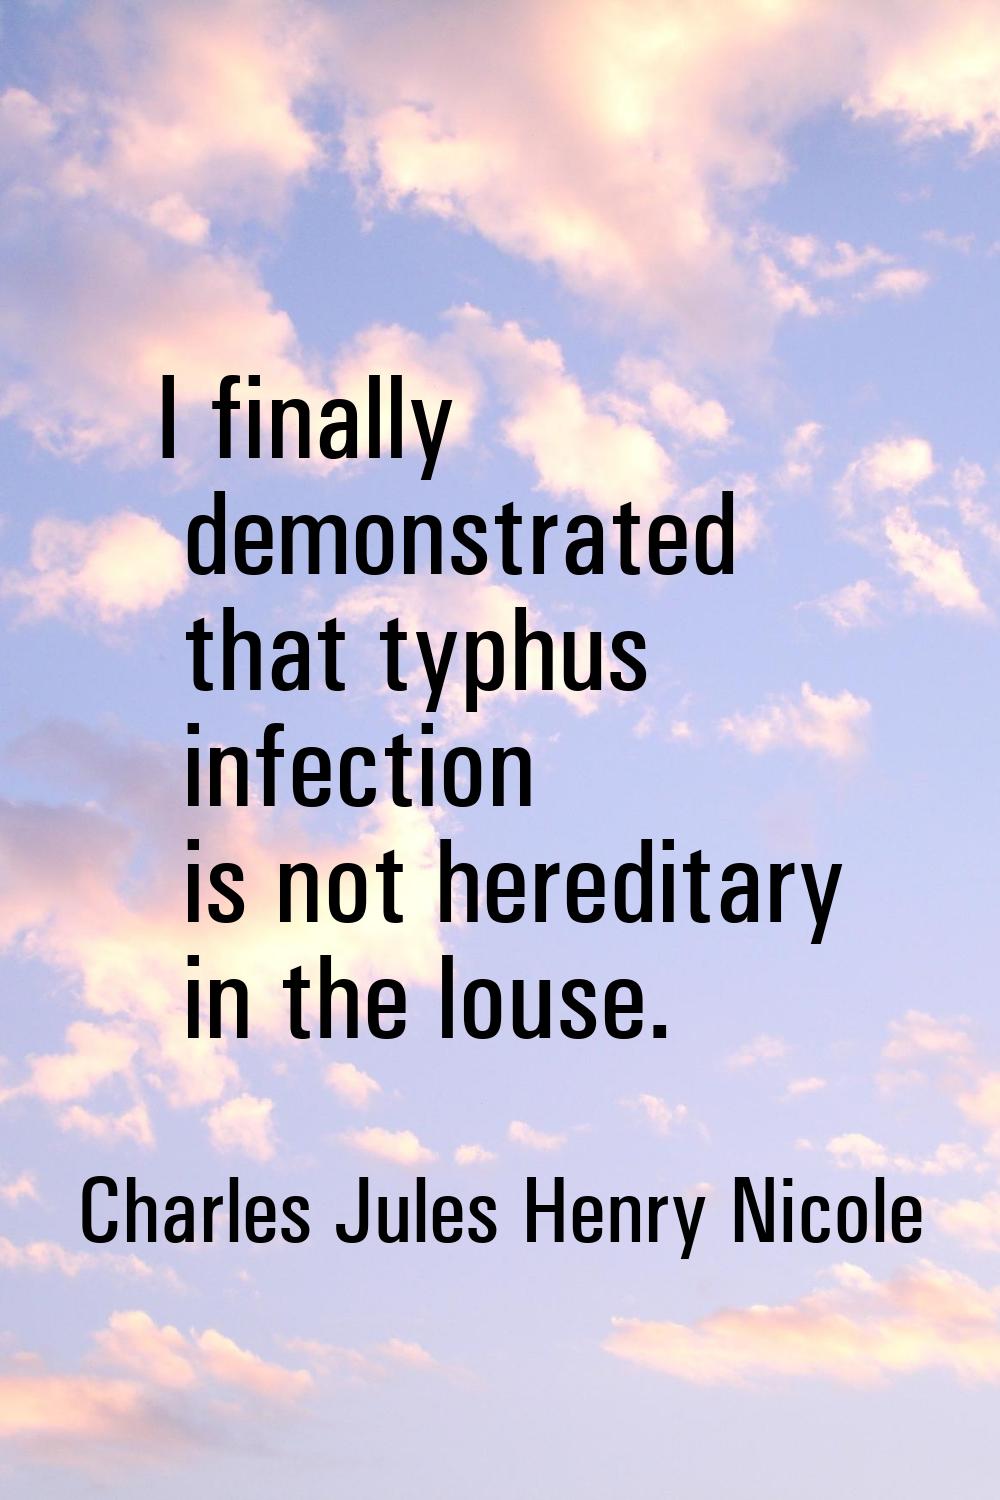 I finally demonstrated that typhus infection is not hereditary in the louse.